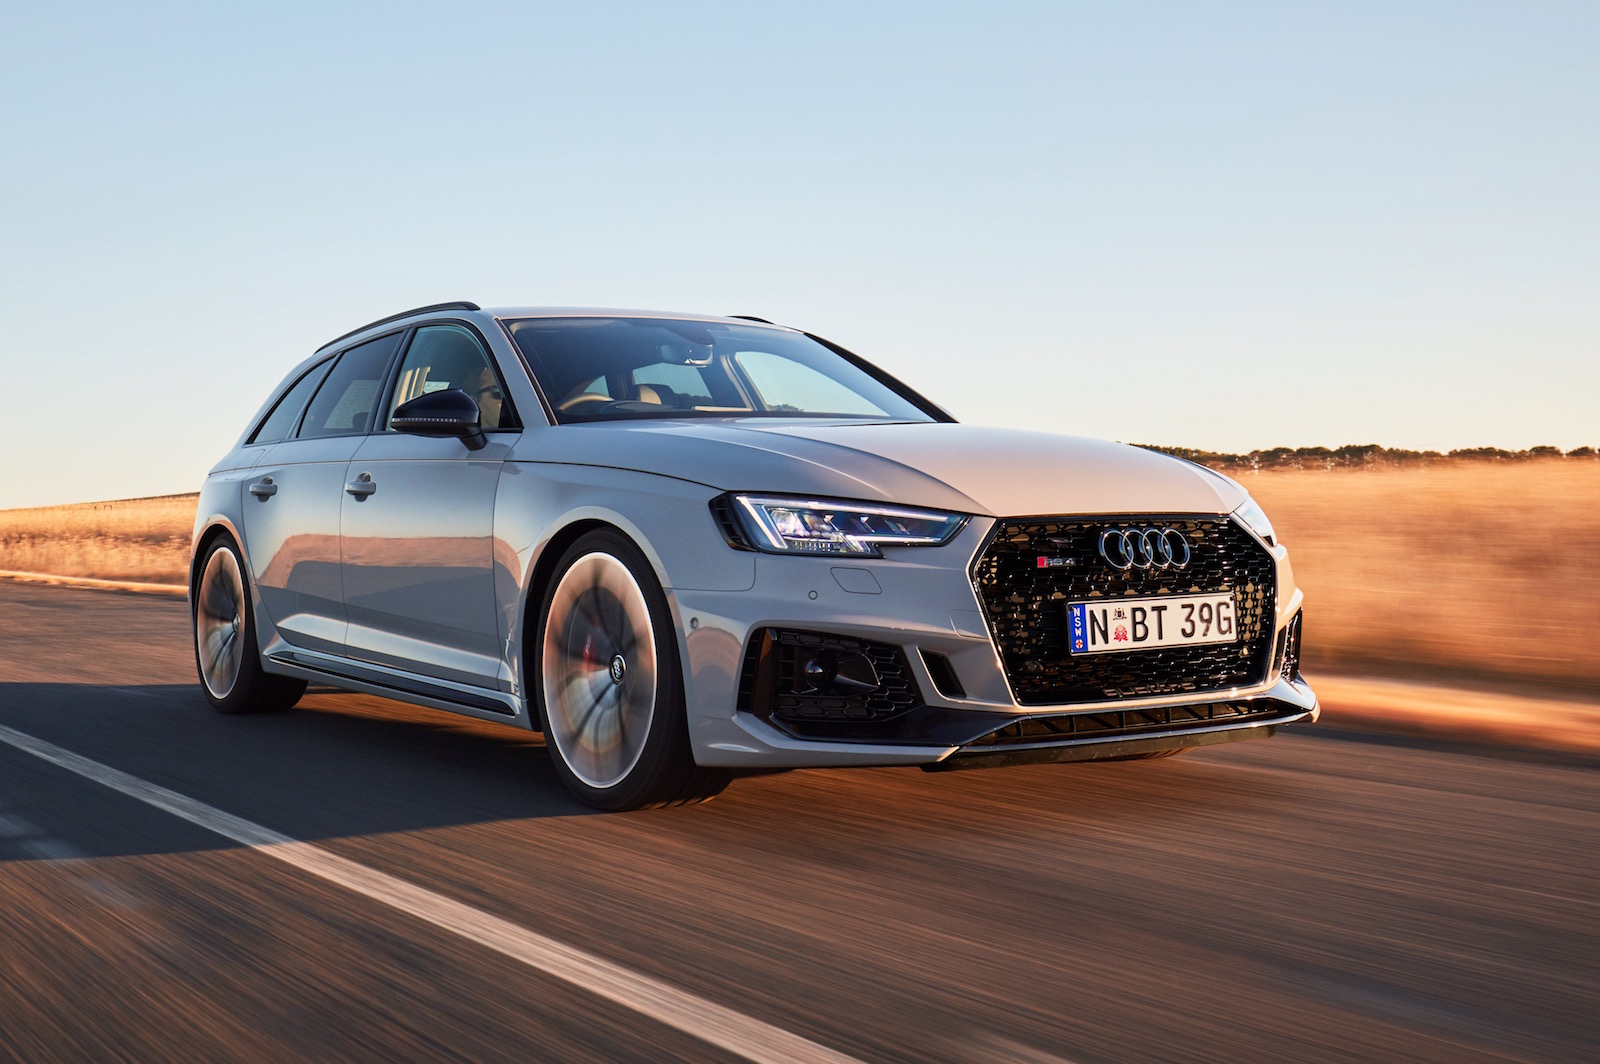 2018 Audi RS 4 Avant now on sale in Australia from $152,900